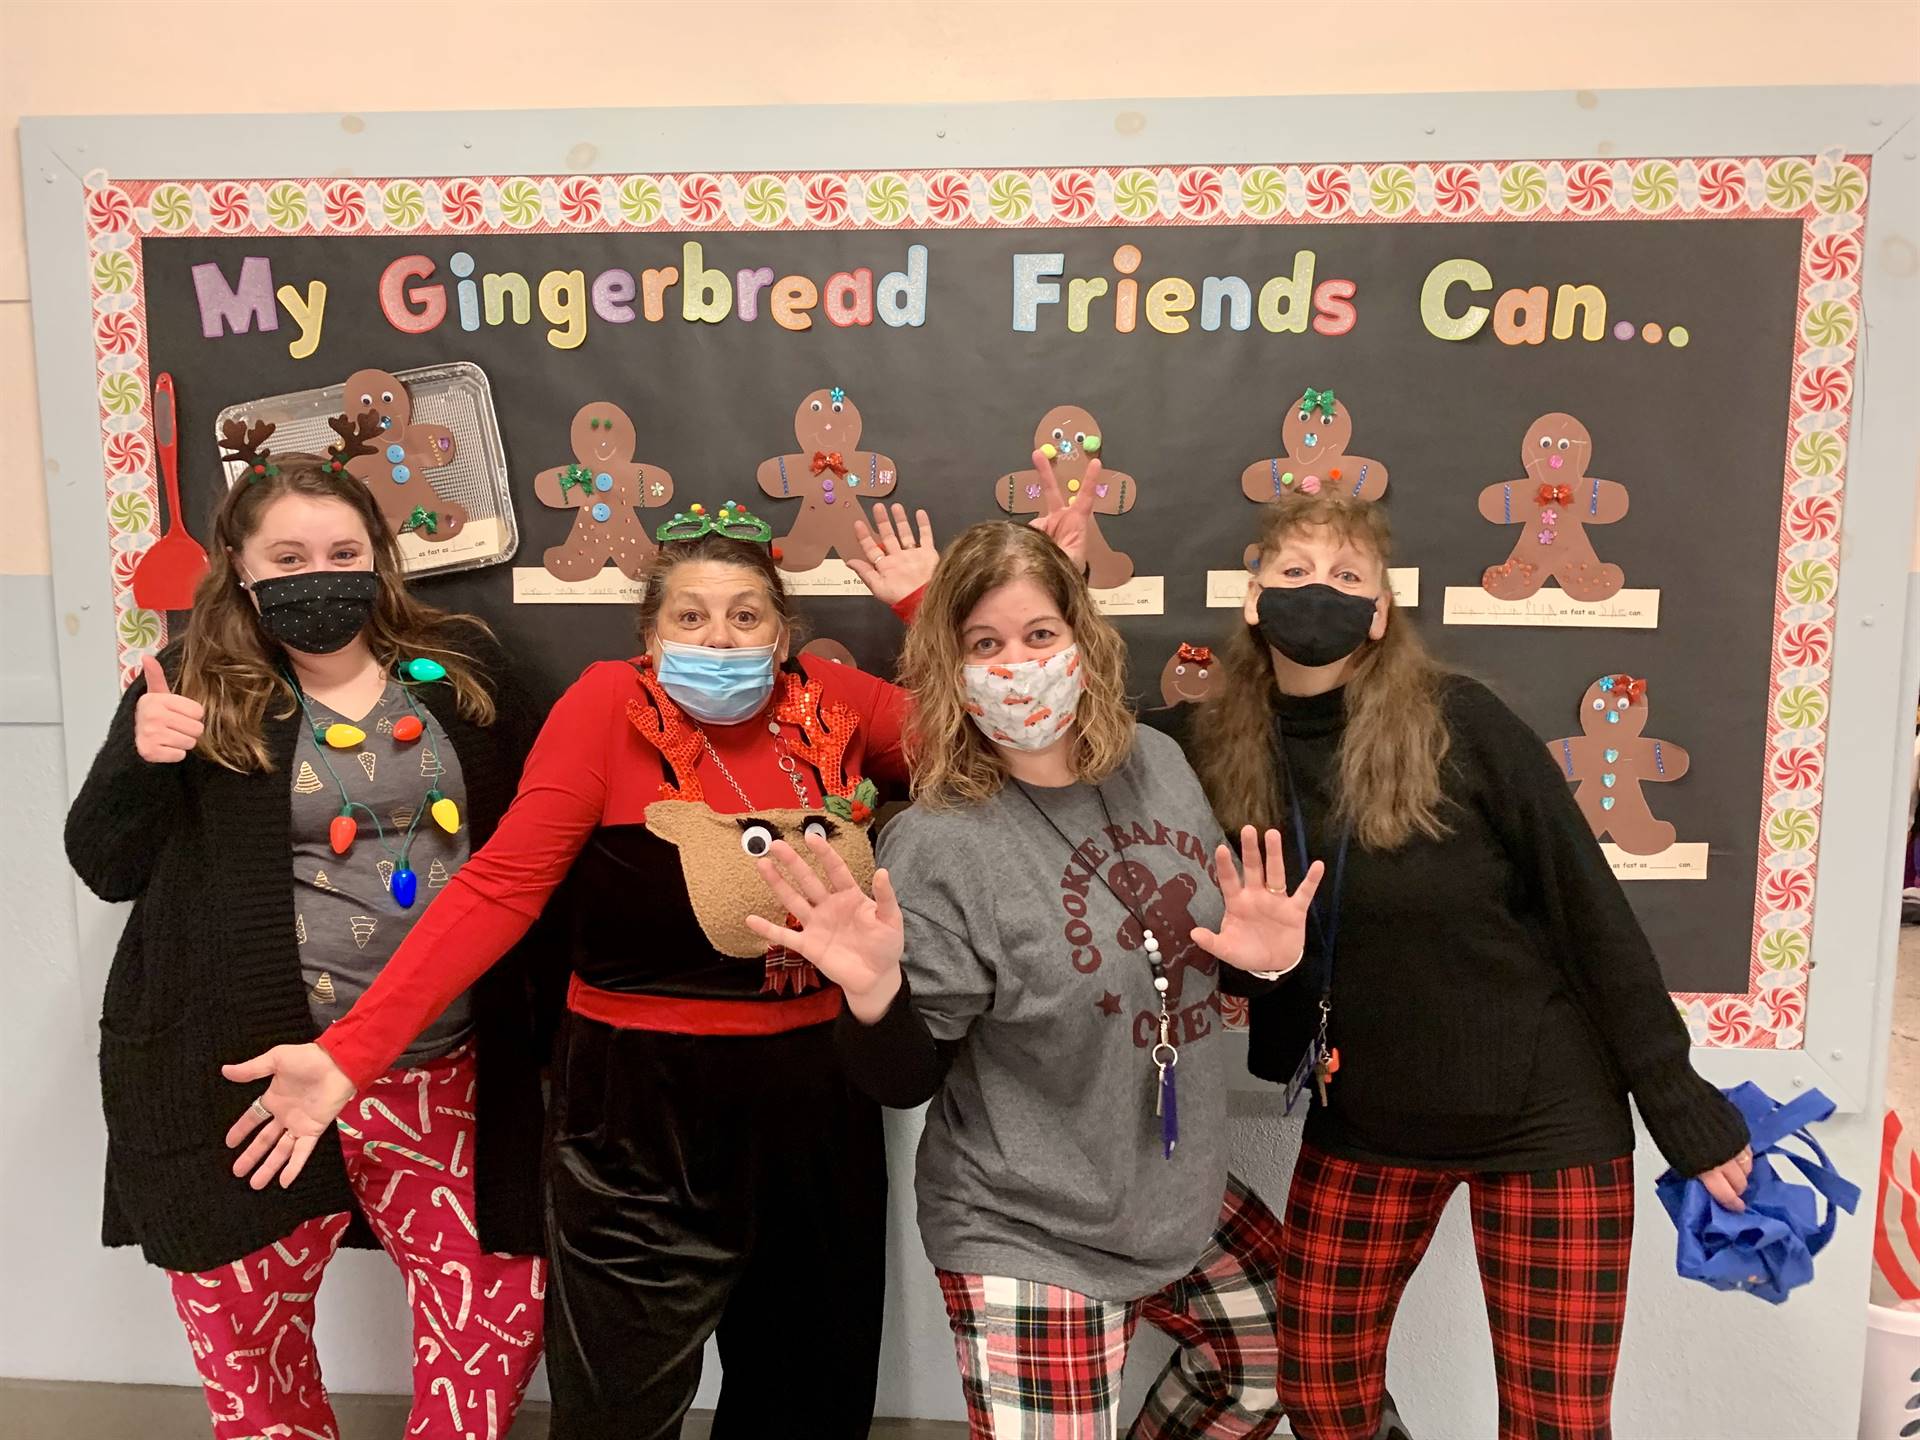 4 teachers standing with bulletin board background with gingerbread friends. 